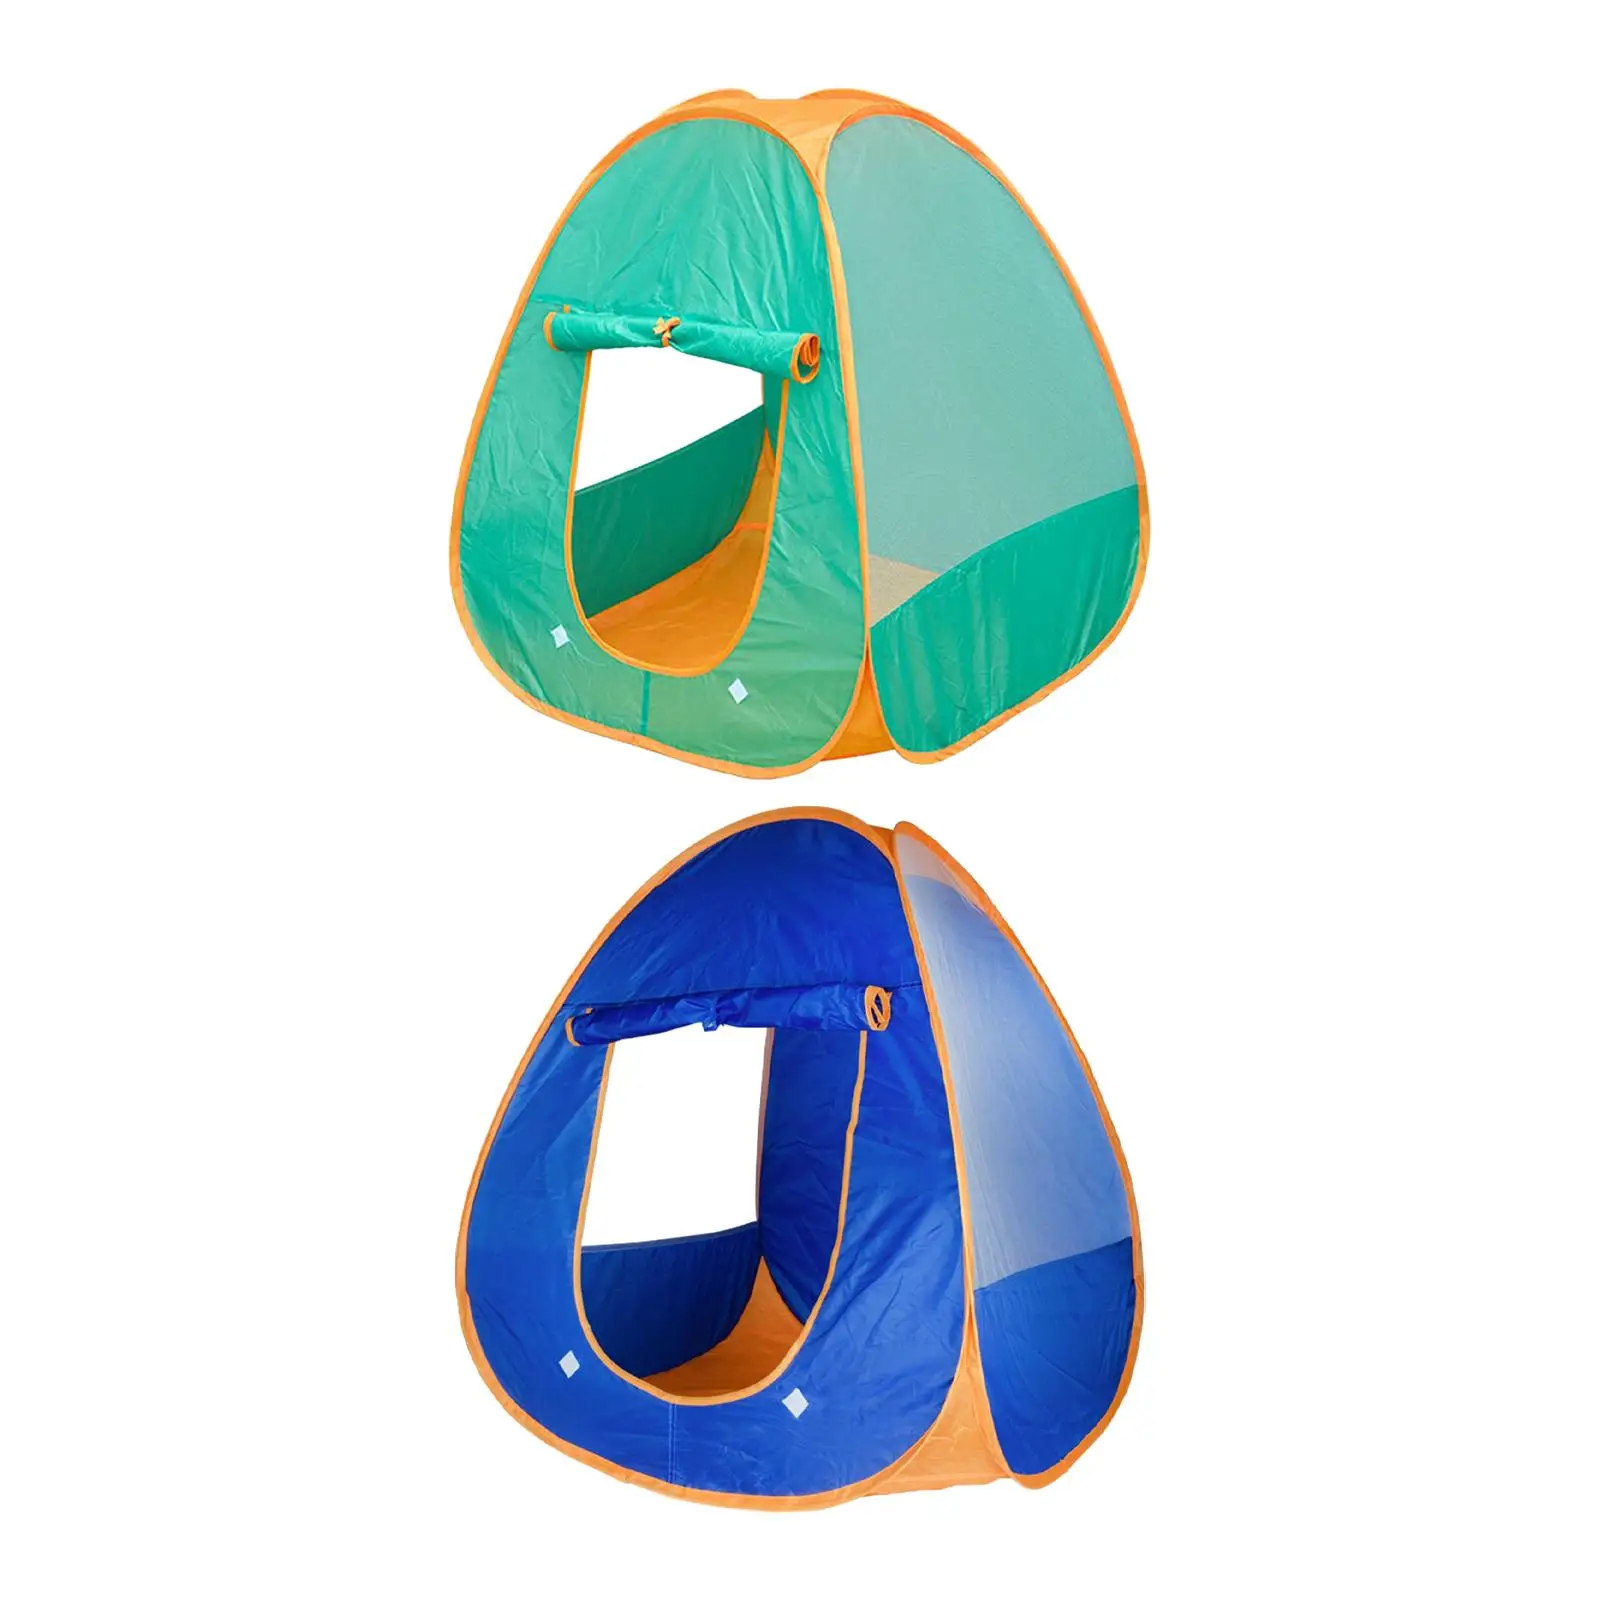 Children Play Tent Collapsible Portable Pretend Play Birthday Gifts Child Room Decor for Party Indoor Outdoor Camping Beach Home